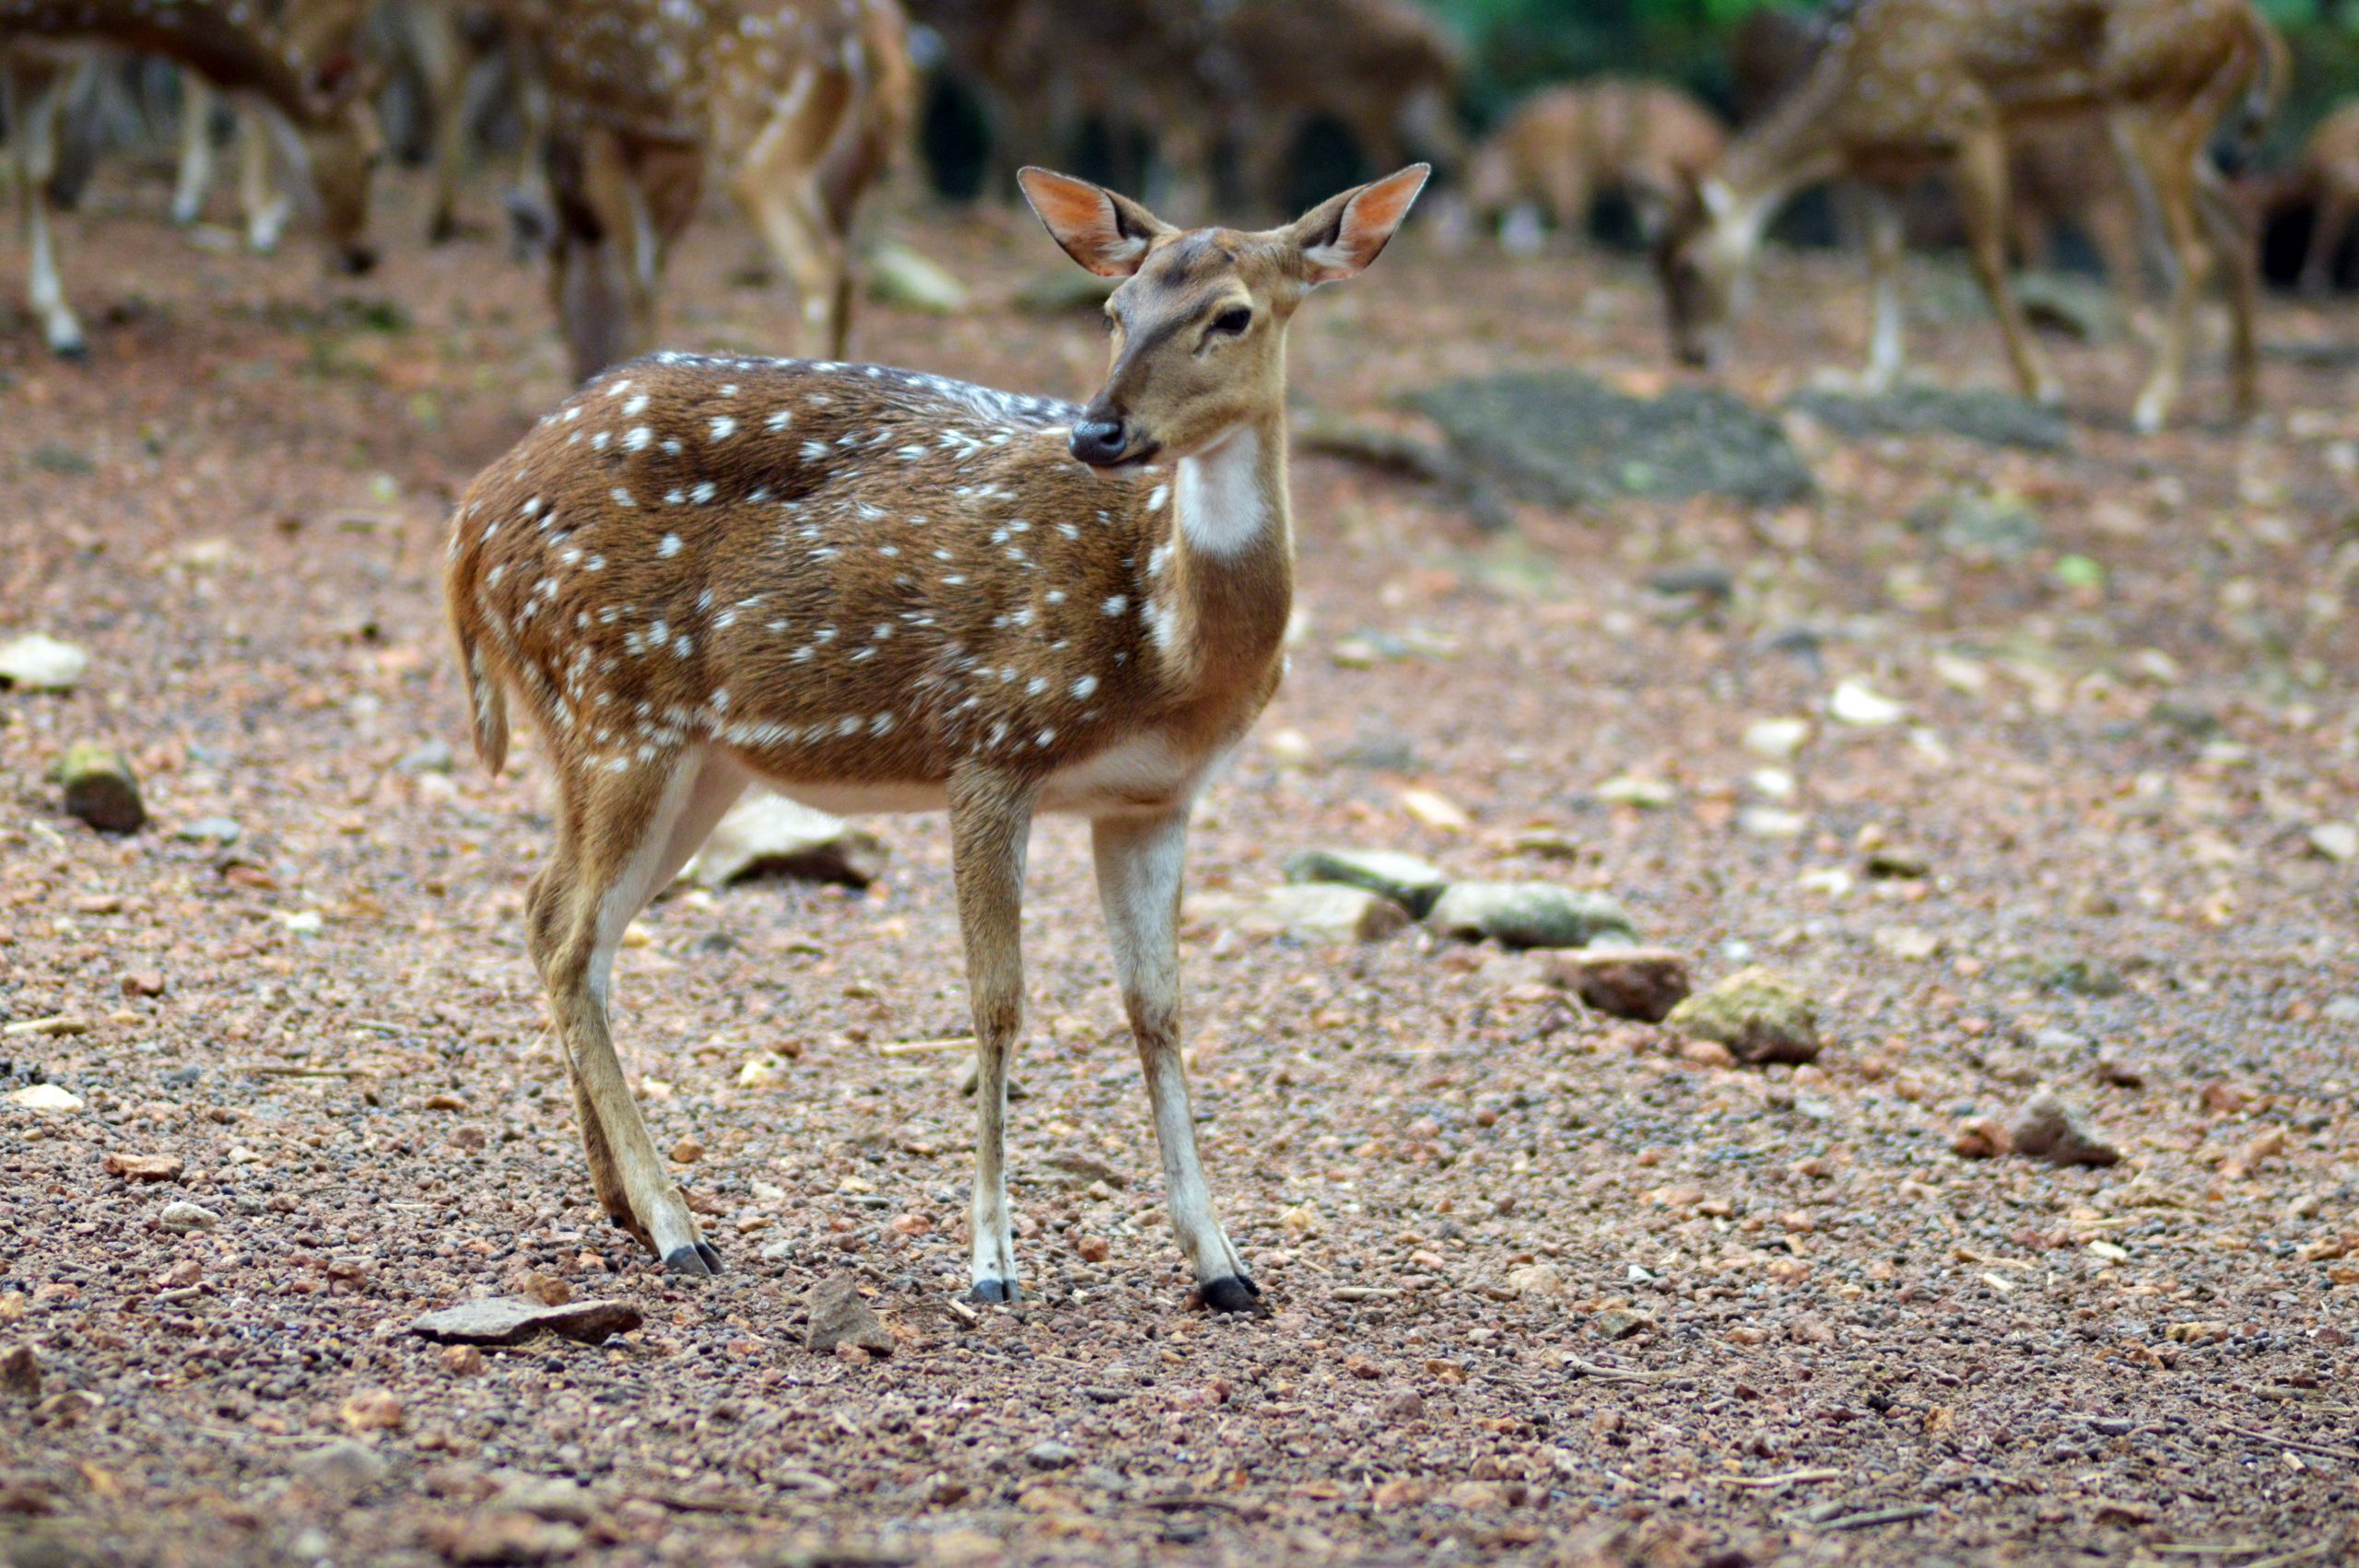 White spotted deer in a jungle